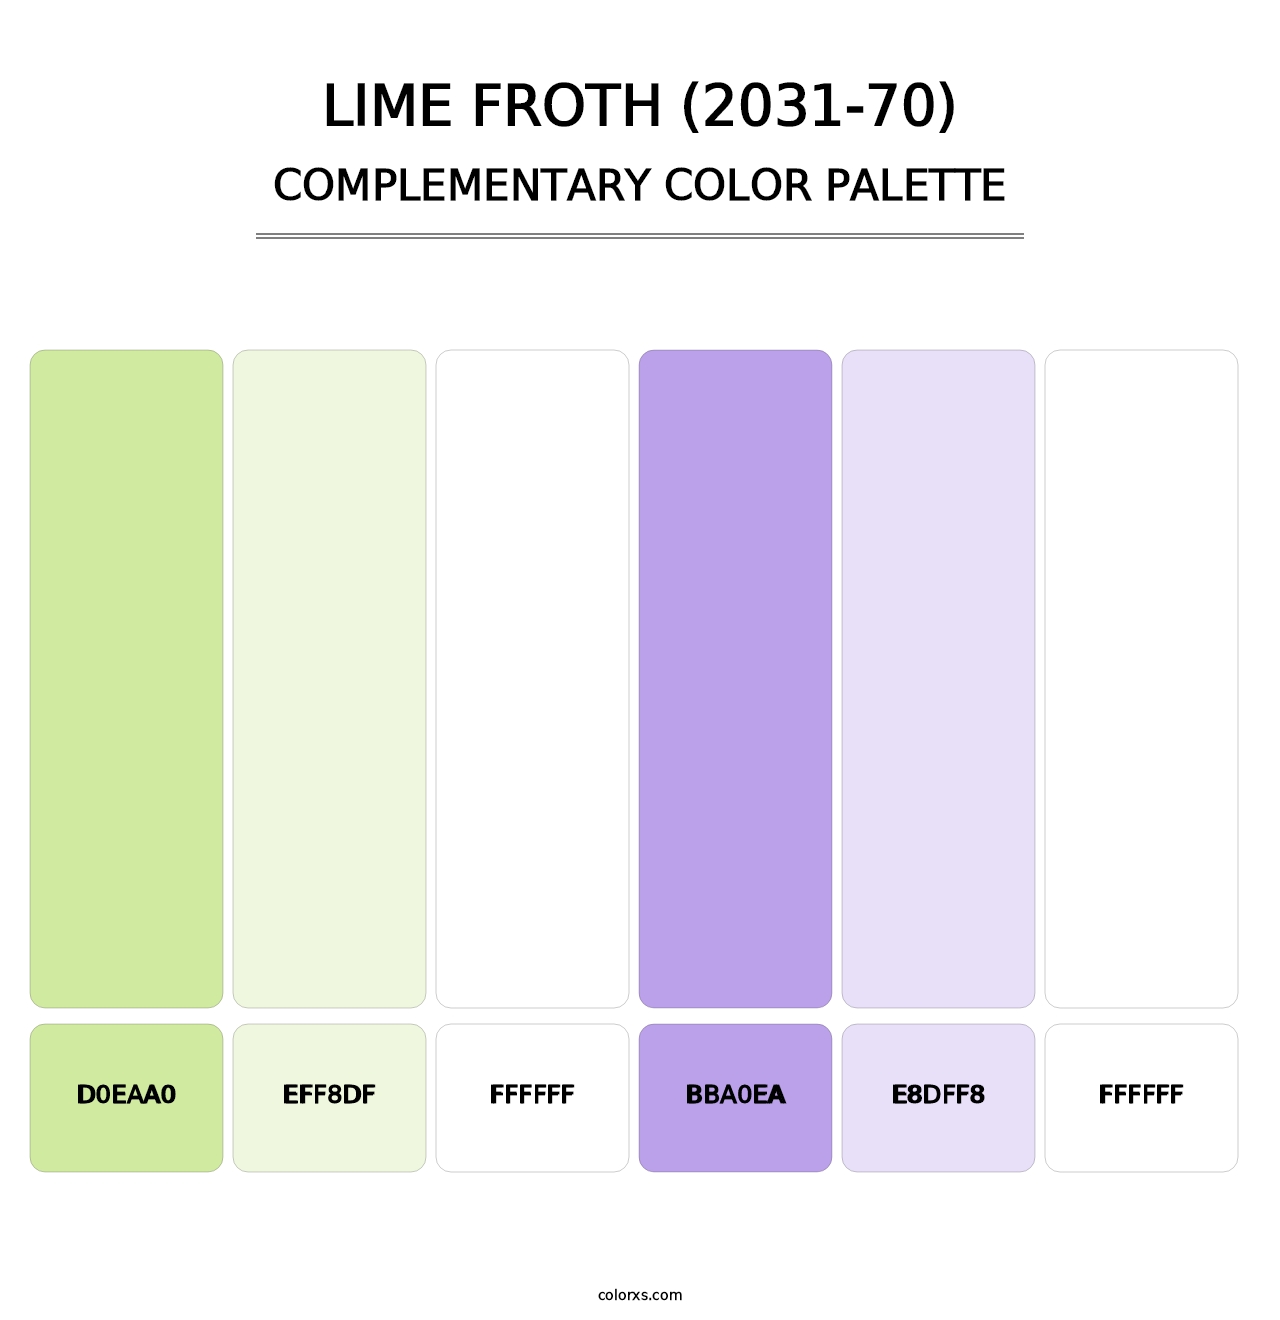 Lime Froth (2031-70) - Complementary Color Palette